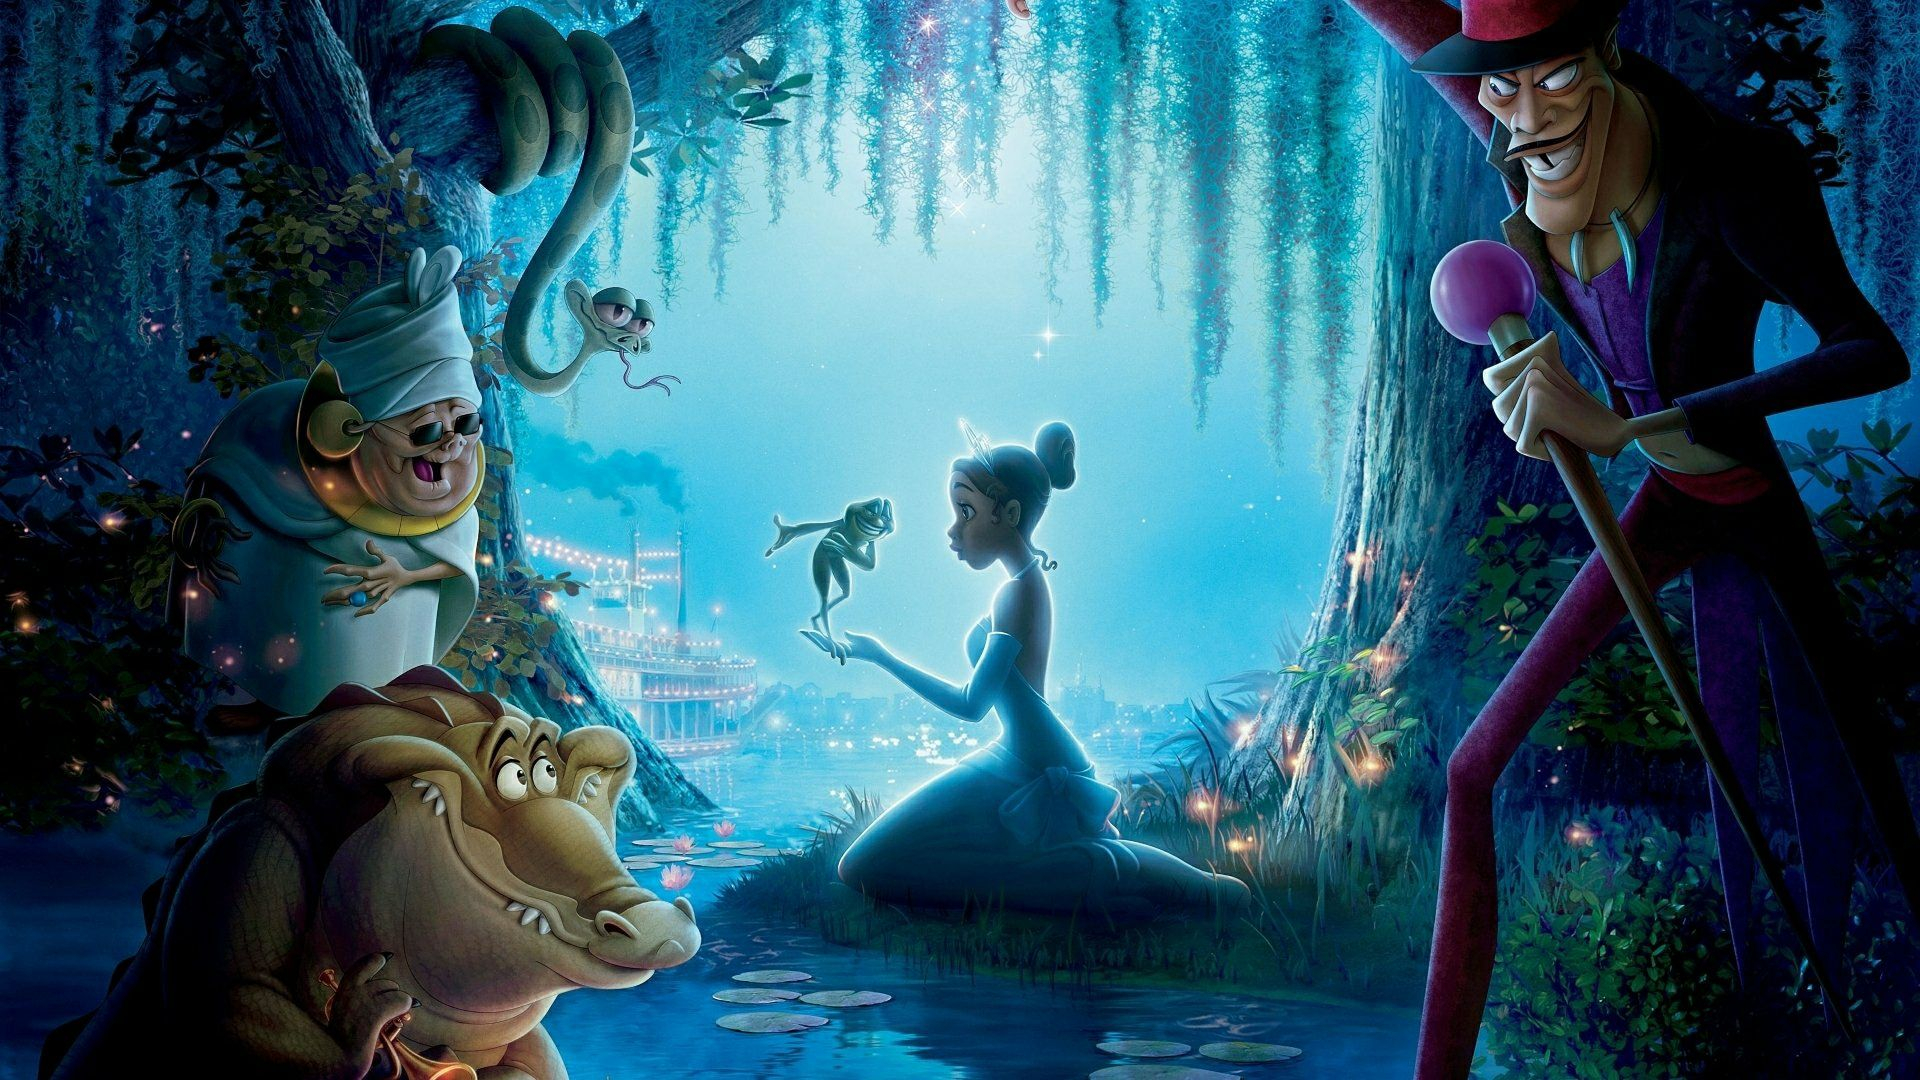 1920x1080 The Princess And The Frog HD Wallpaper